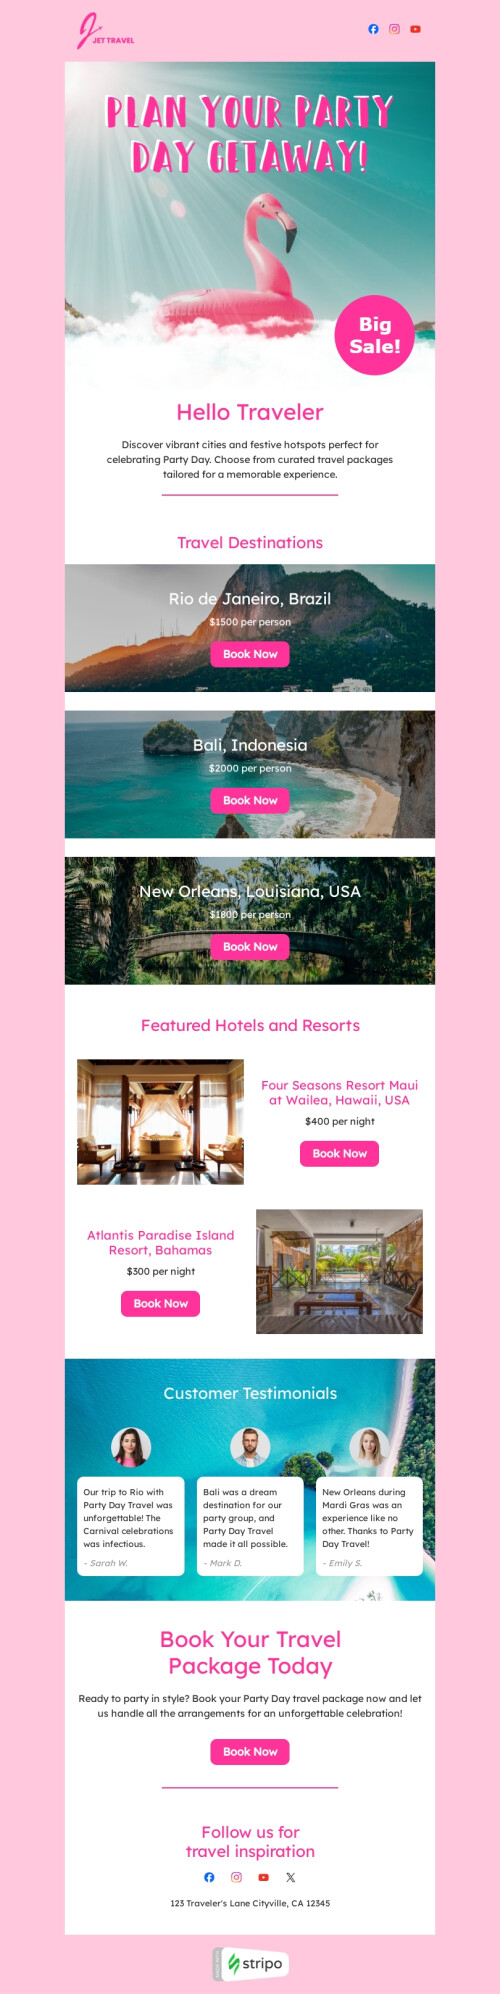 Party Day email template "Plan your party" for travel industry desktop view